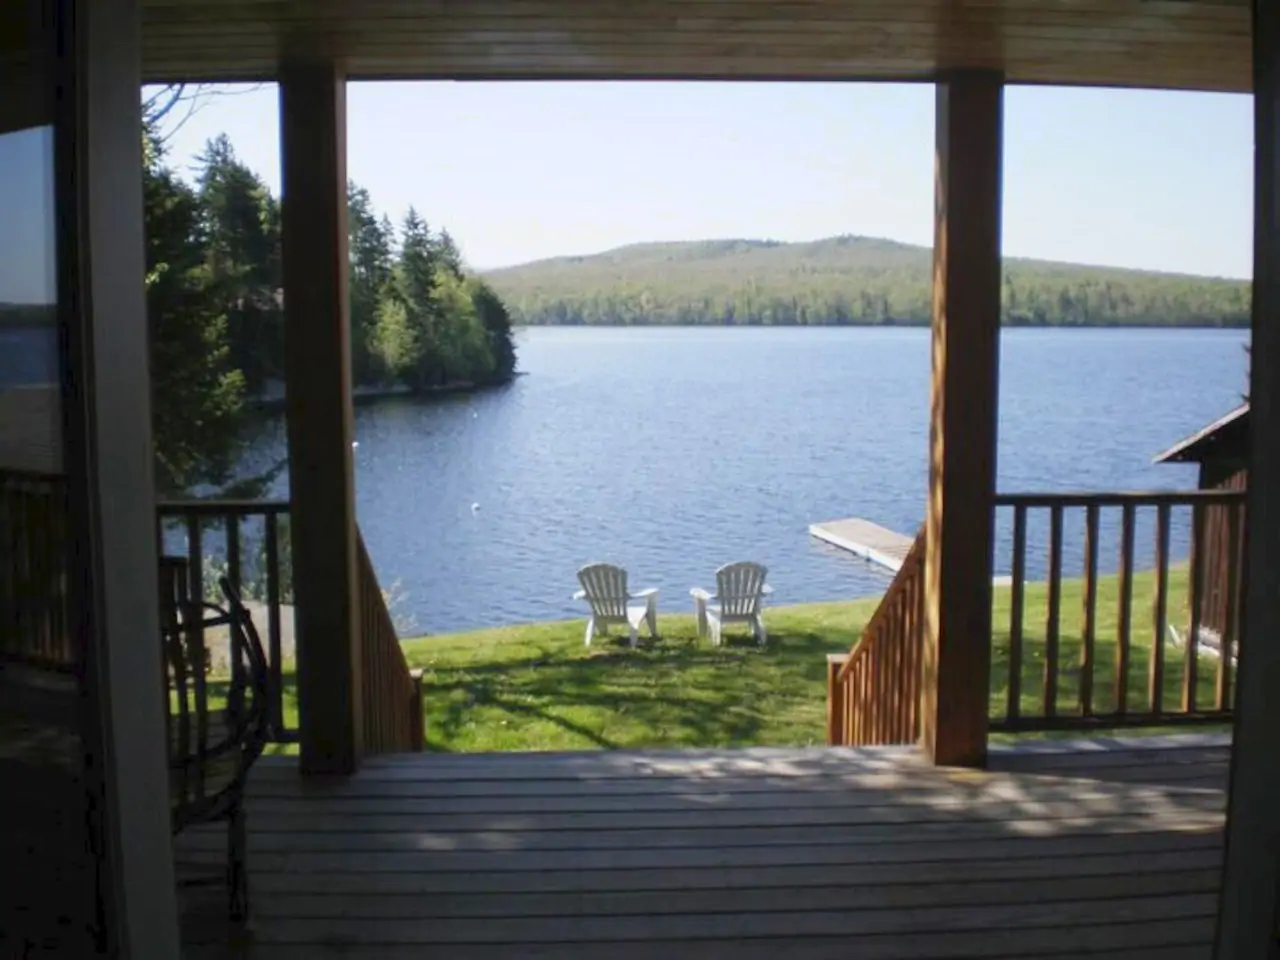 Wooden deck overlooking 2 chairs at the edge of the lawn overlooking a lake with mountains in the distance